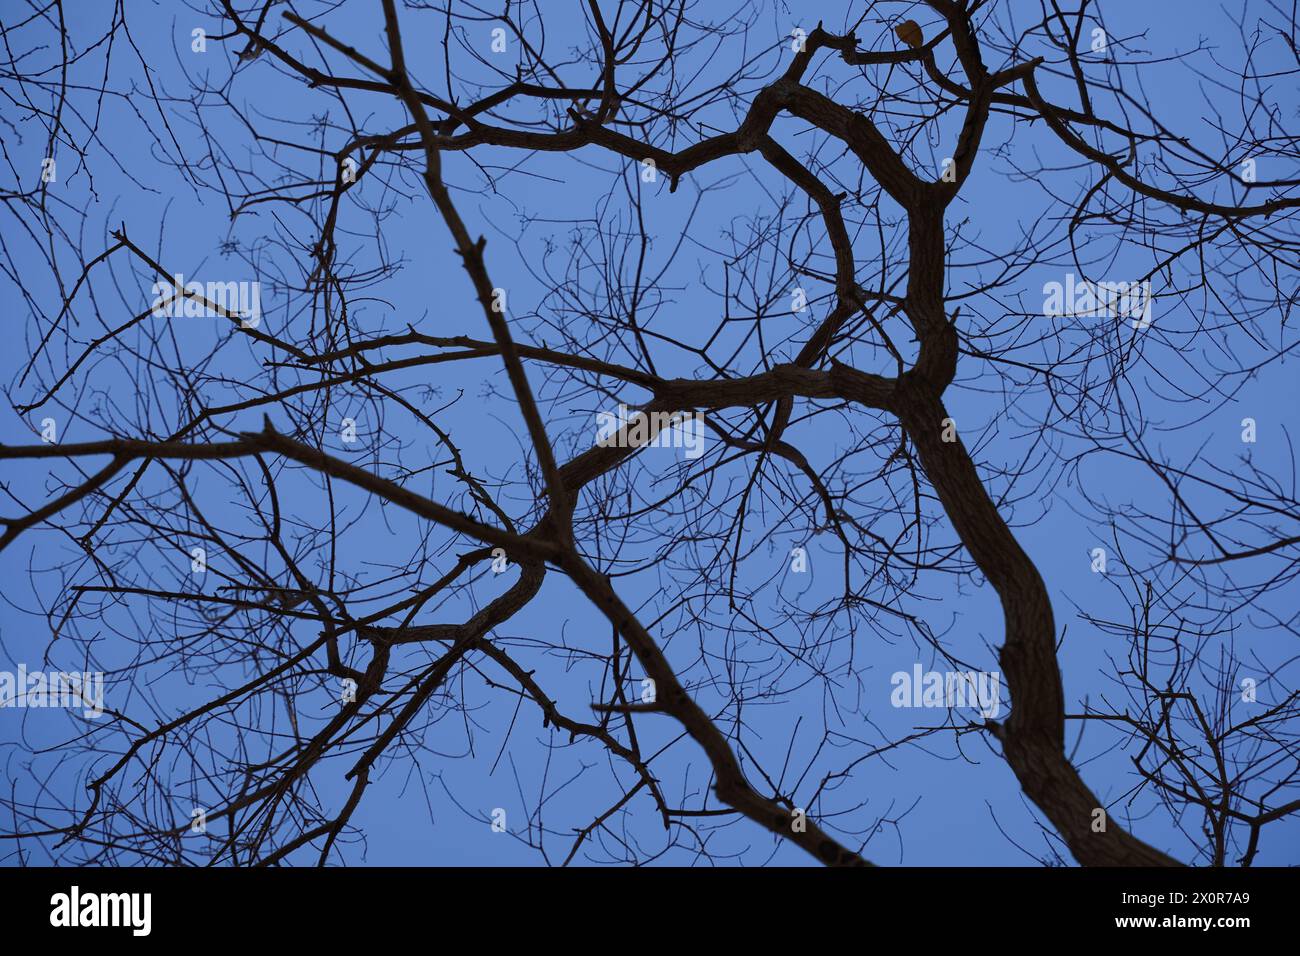 Tree branches against dark blue sky. Stock Photo